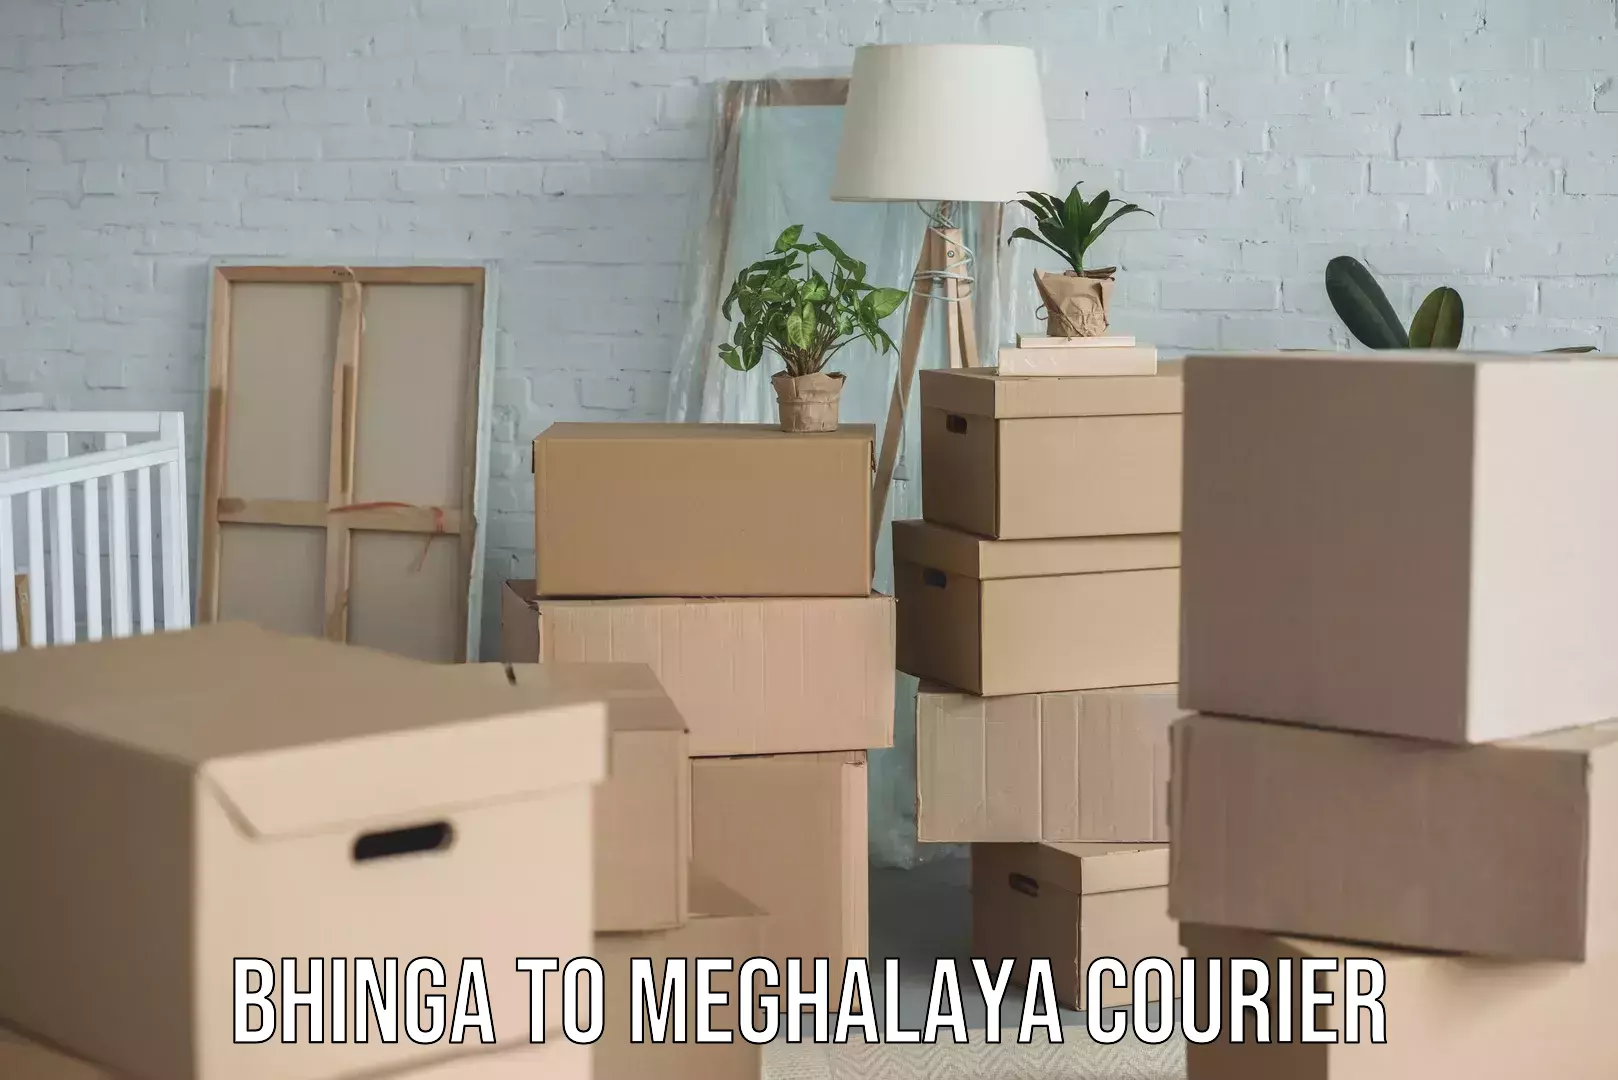 Personal parcel delivery in Bhinga to Meghalaya